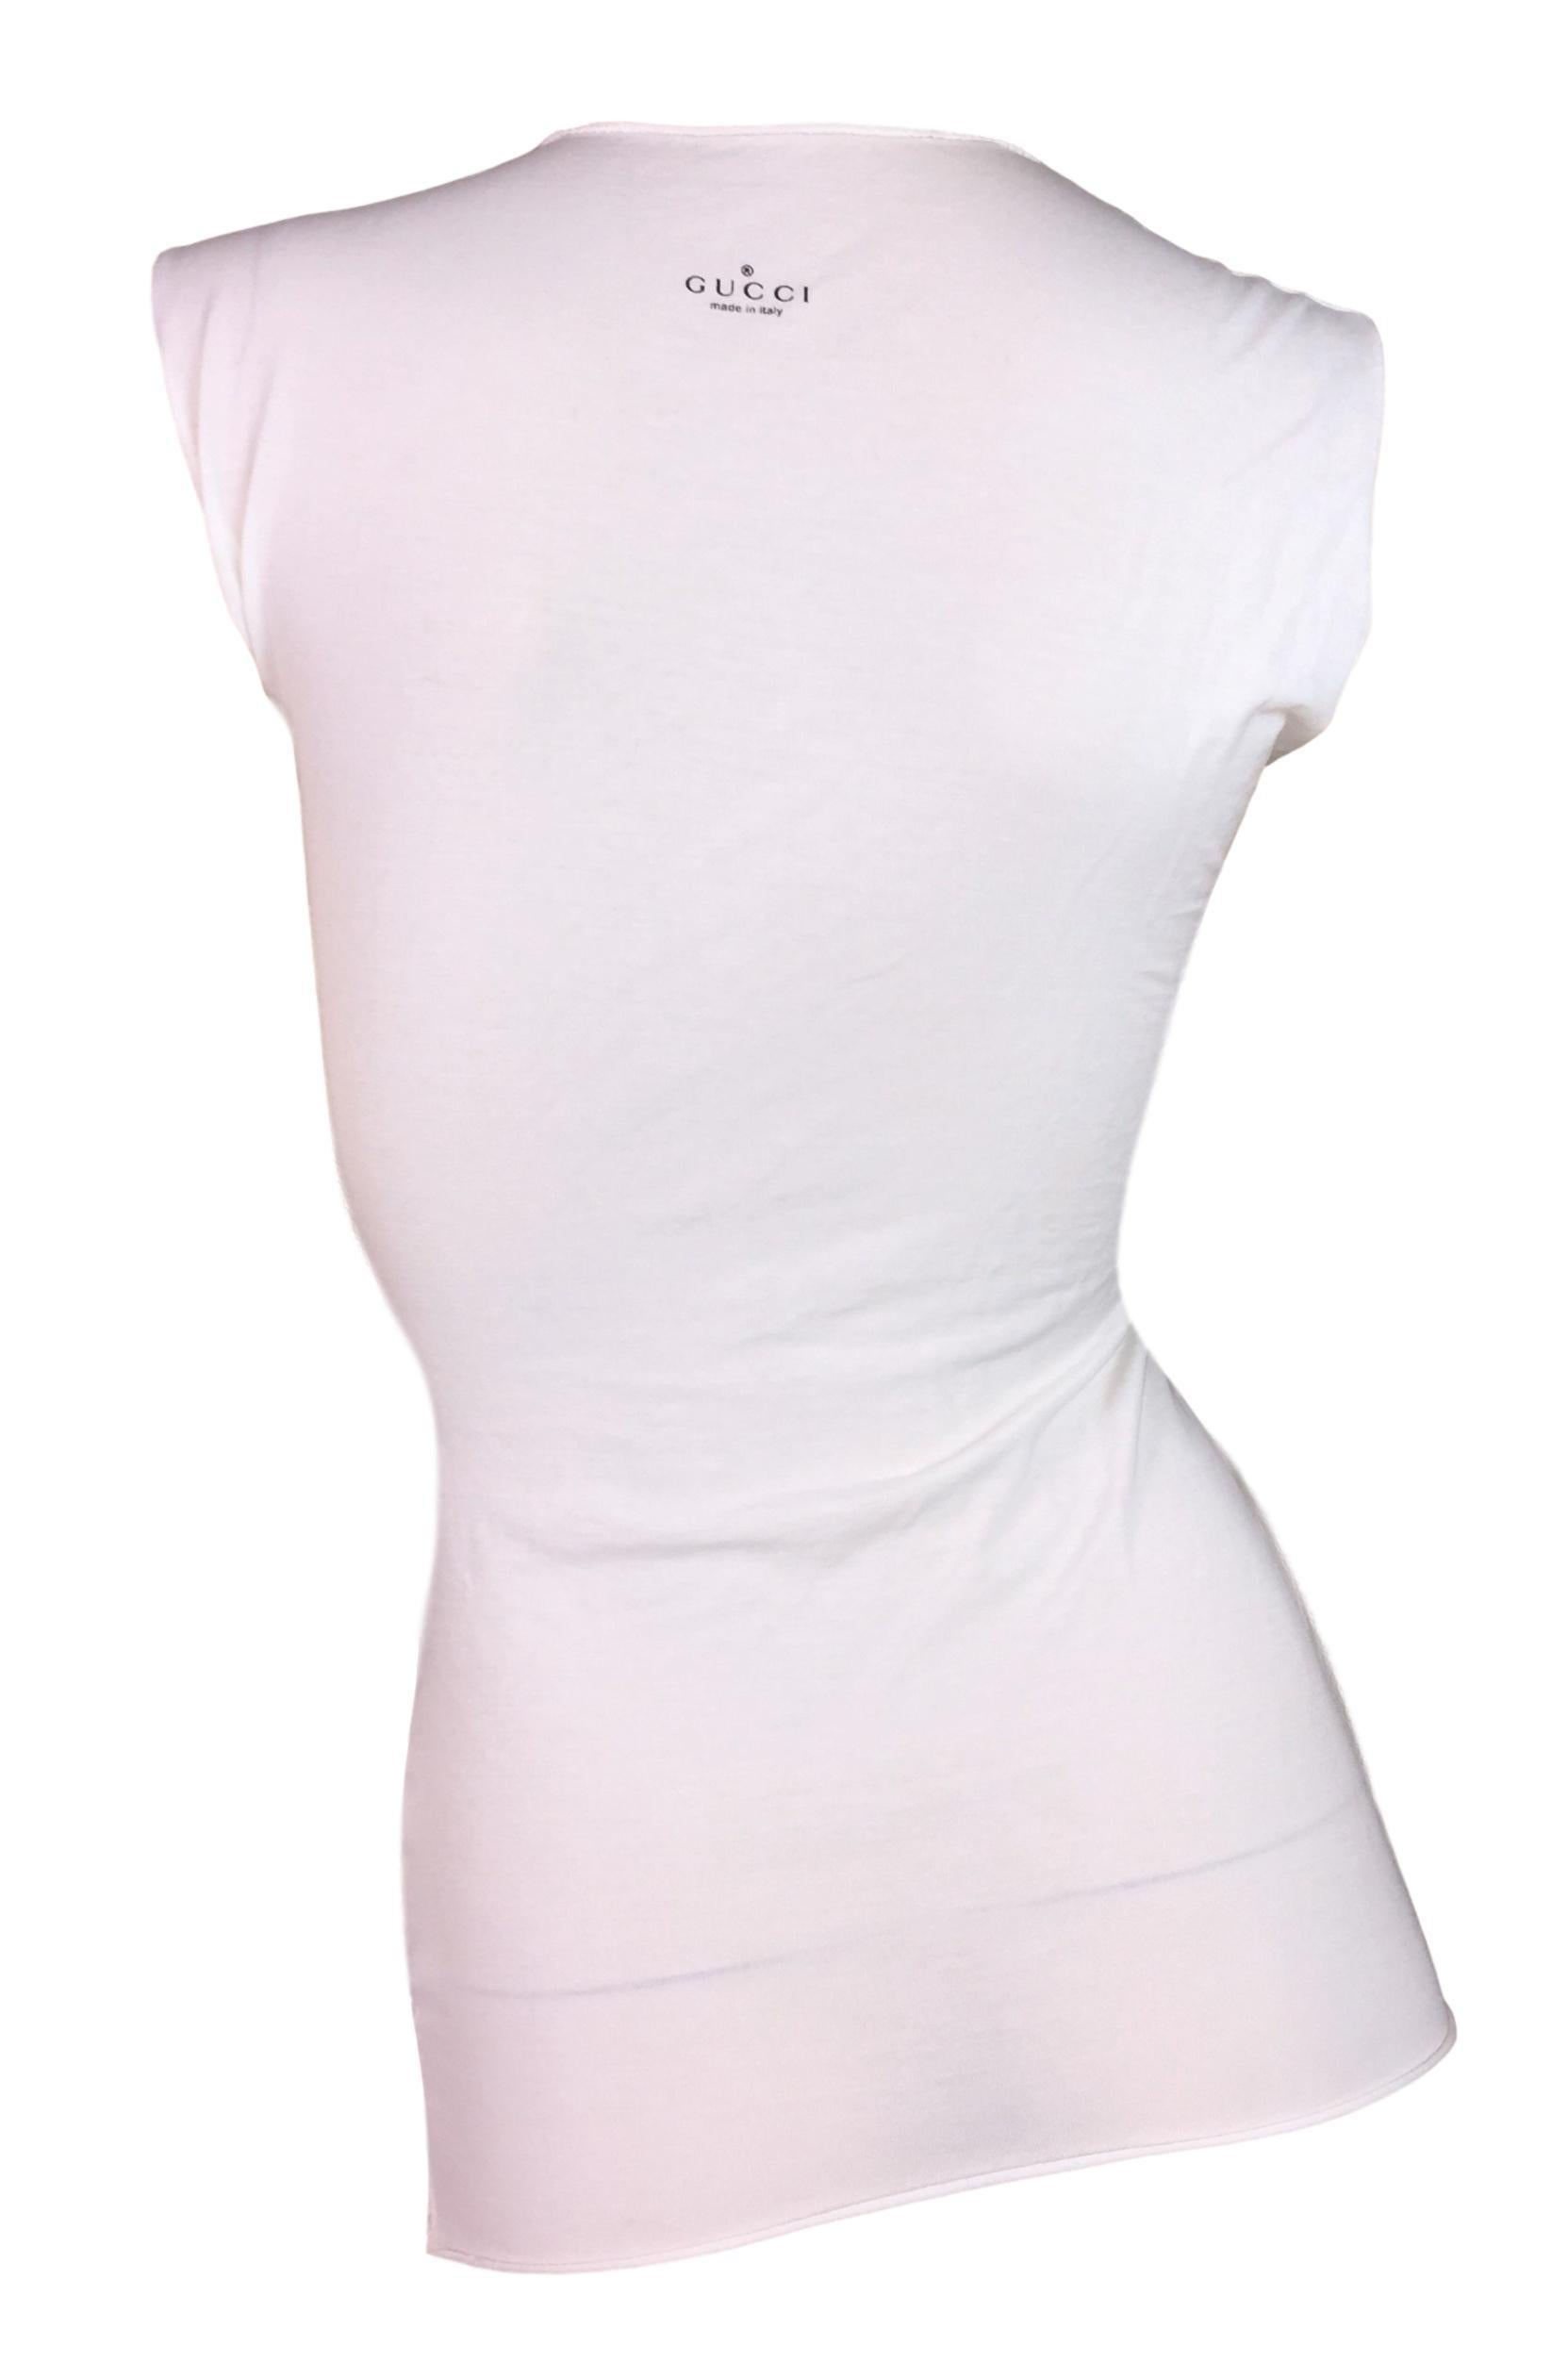 S/S 2001 Gucci by Tom Ford Runway Sheer White Crop Top Cut-Out Shirt 40 In Excellent Condition In Yukon, OK